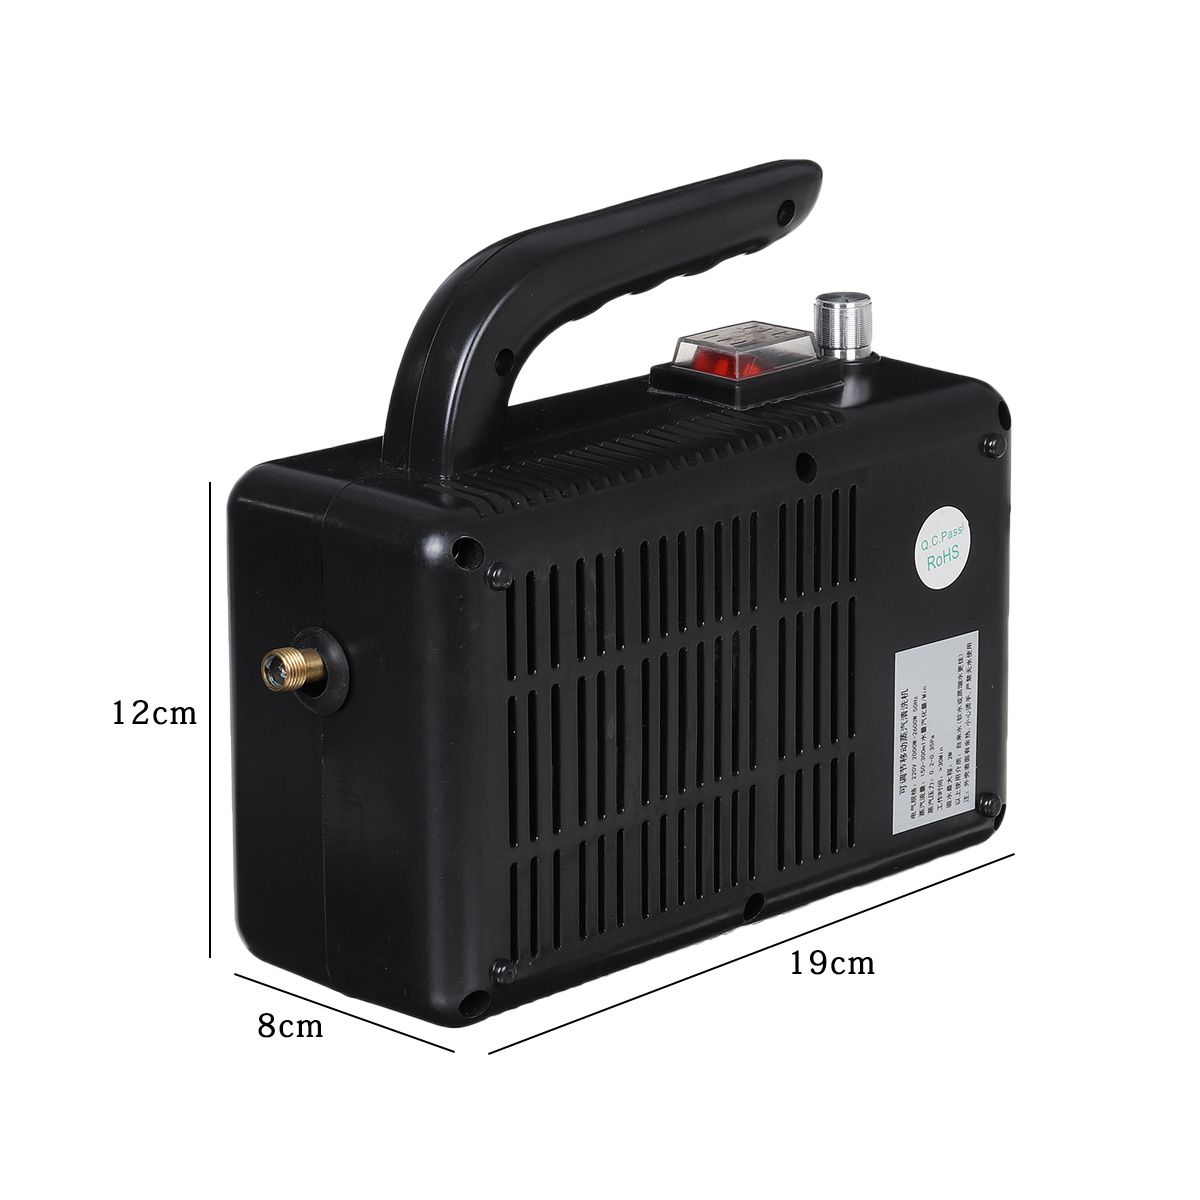 2600W-High-Pressure-Steam-Cleaner-Automatic-Cleaning-Machine-Home-Handheld-Kit-1664359